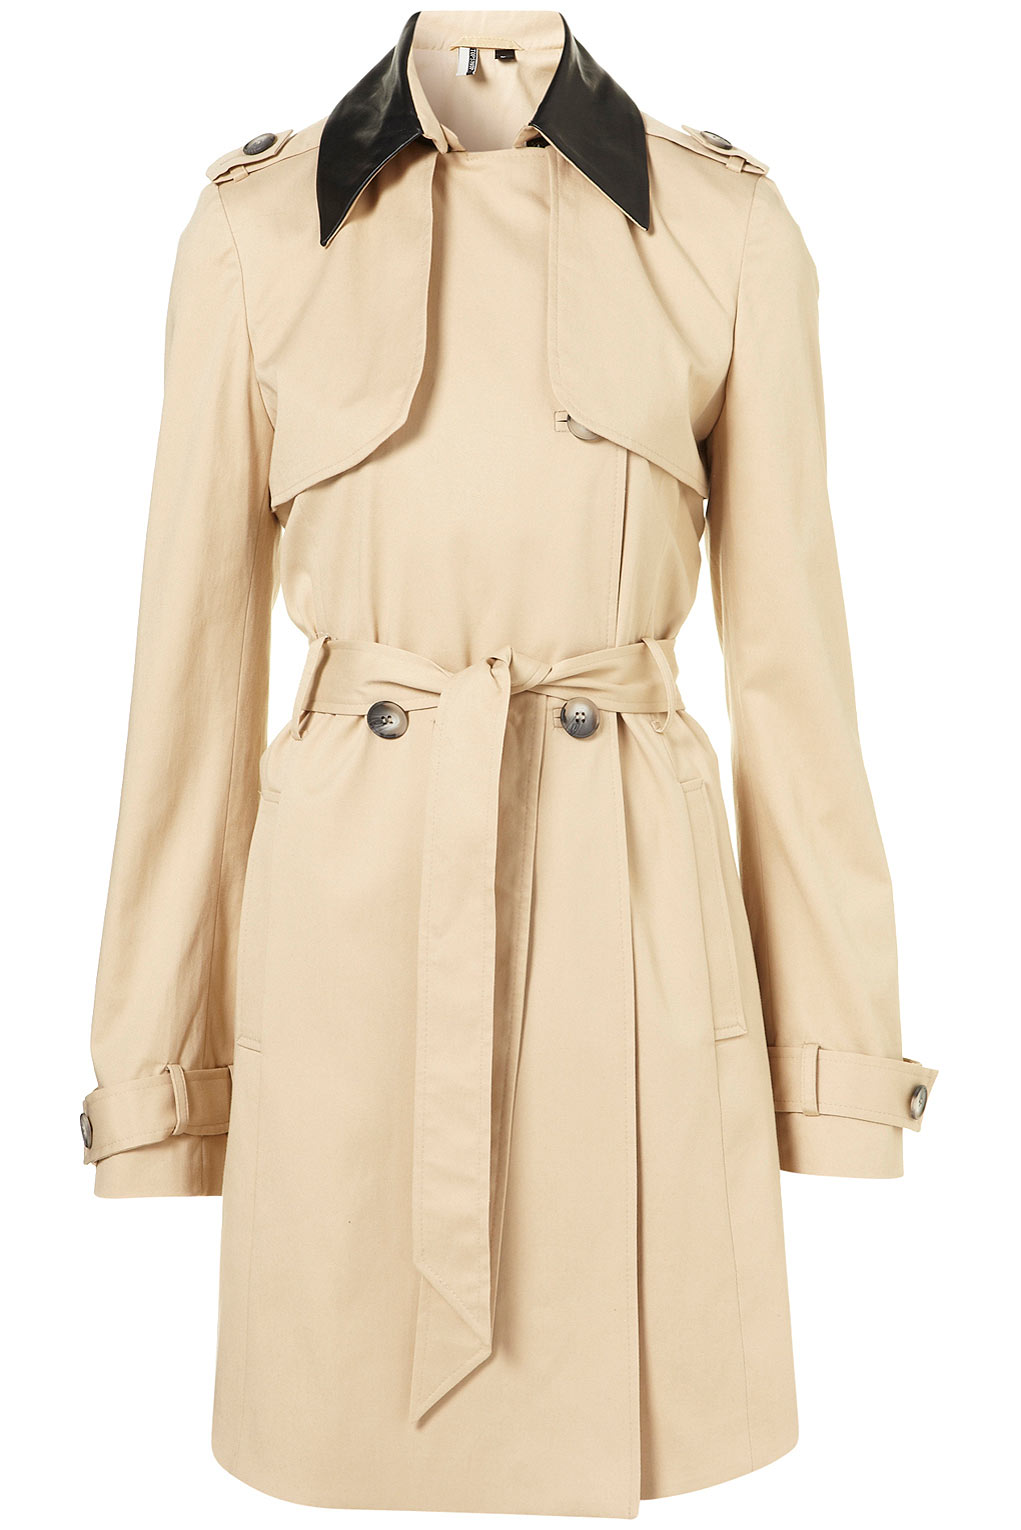 Topshop Premium Leather Collar Trench in Natural | Lyst